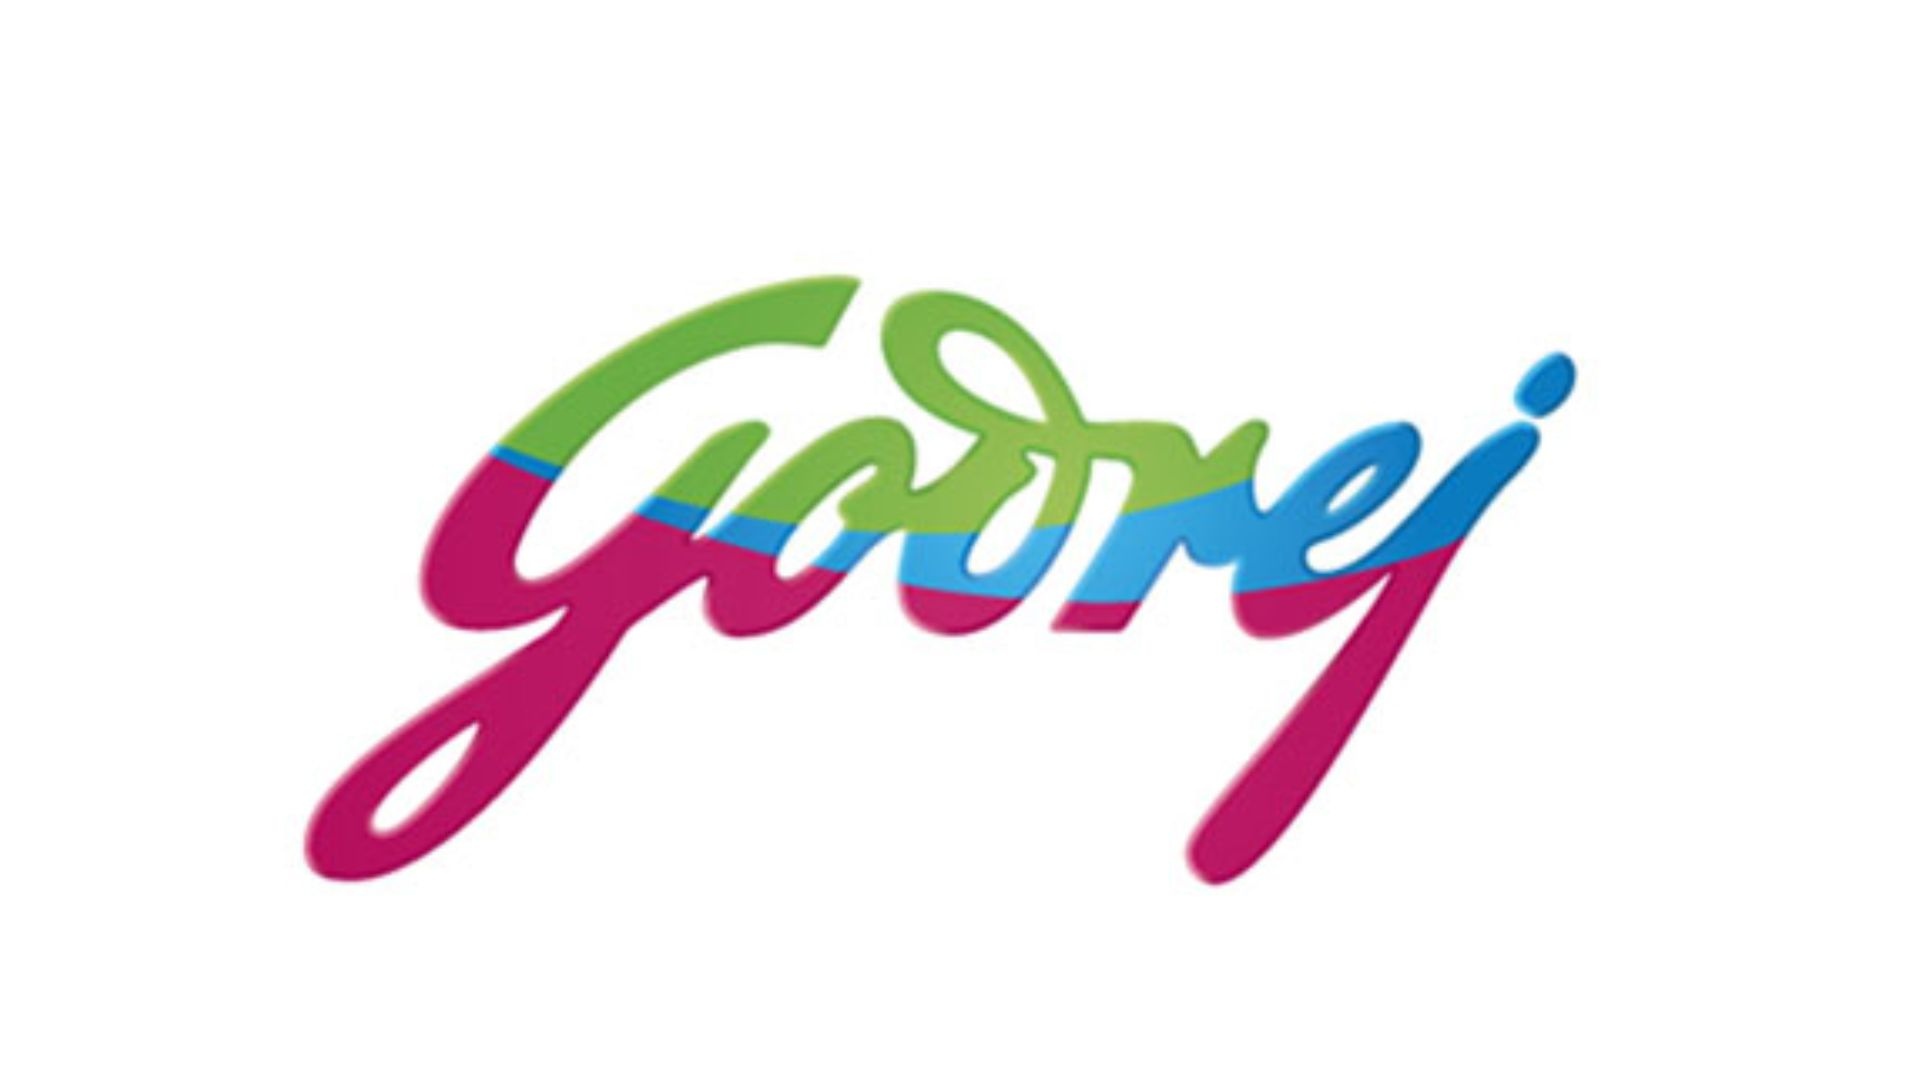 Godrej family divides conglomerate after 127 Years